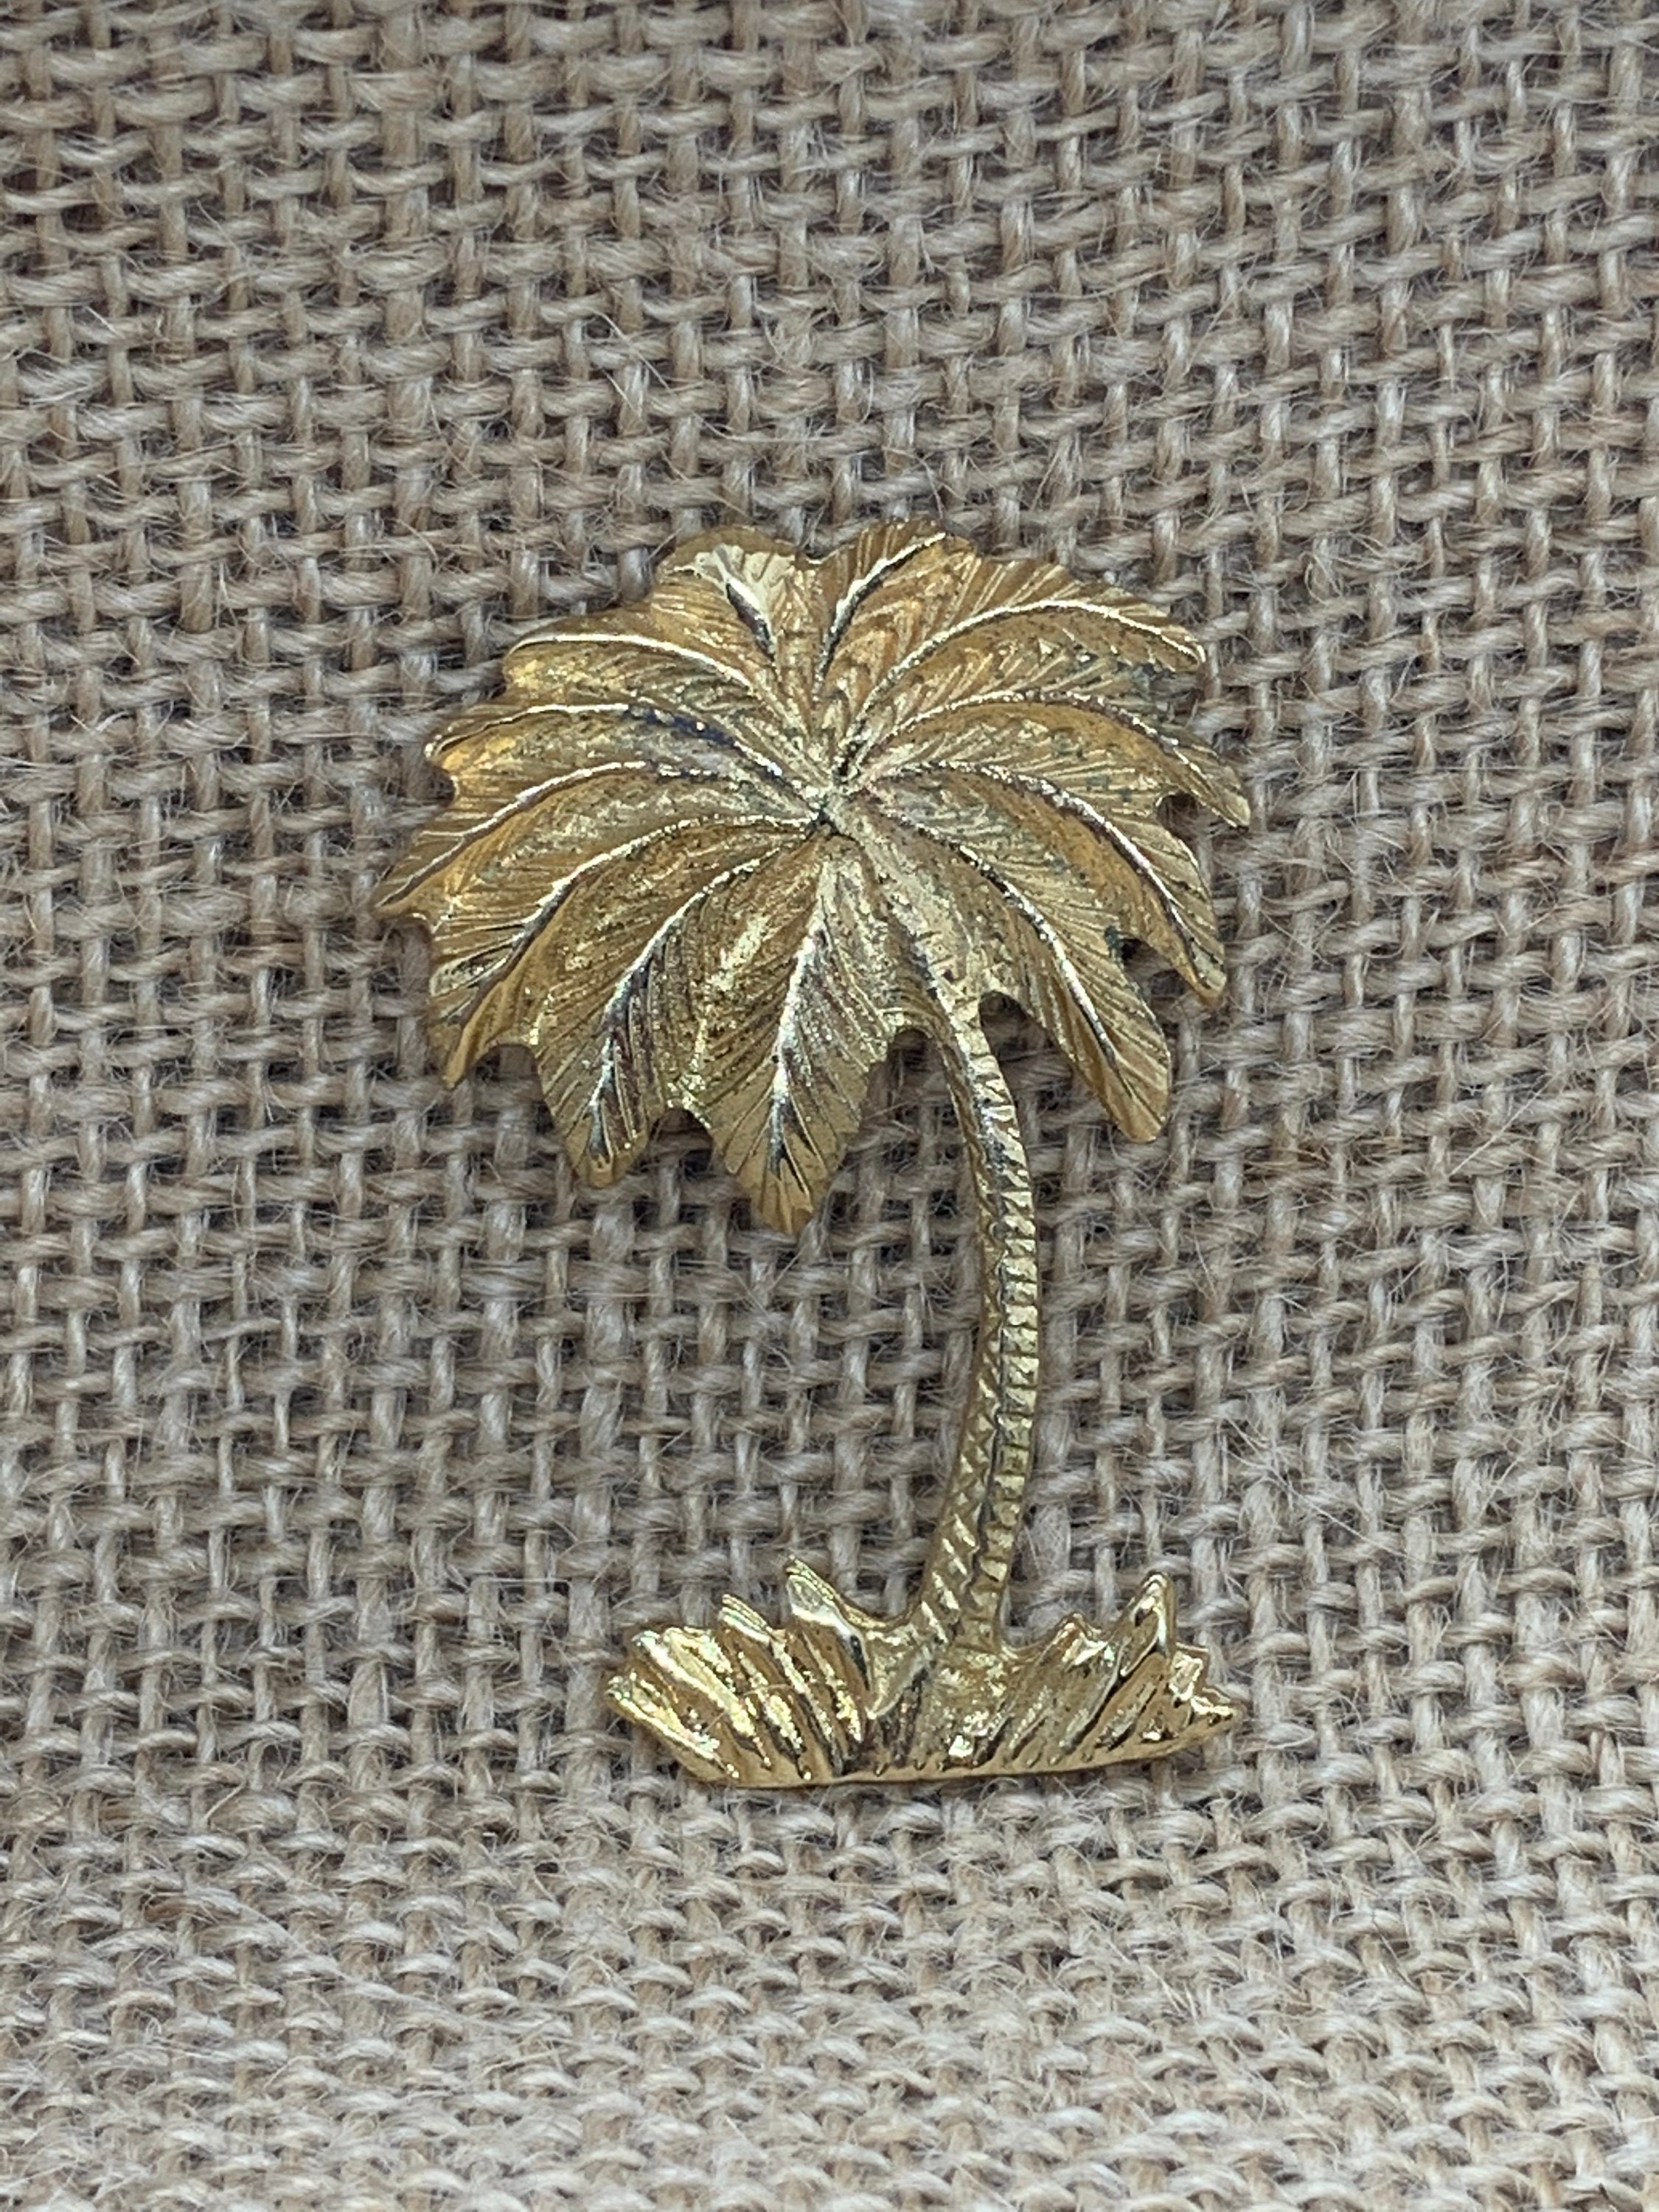 Small Vintage Goldtone Double Palm Tree Pin Embellished with Clear Crystals  and Green Enamel